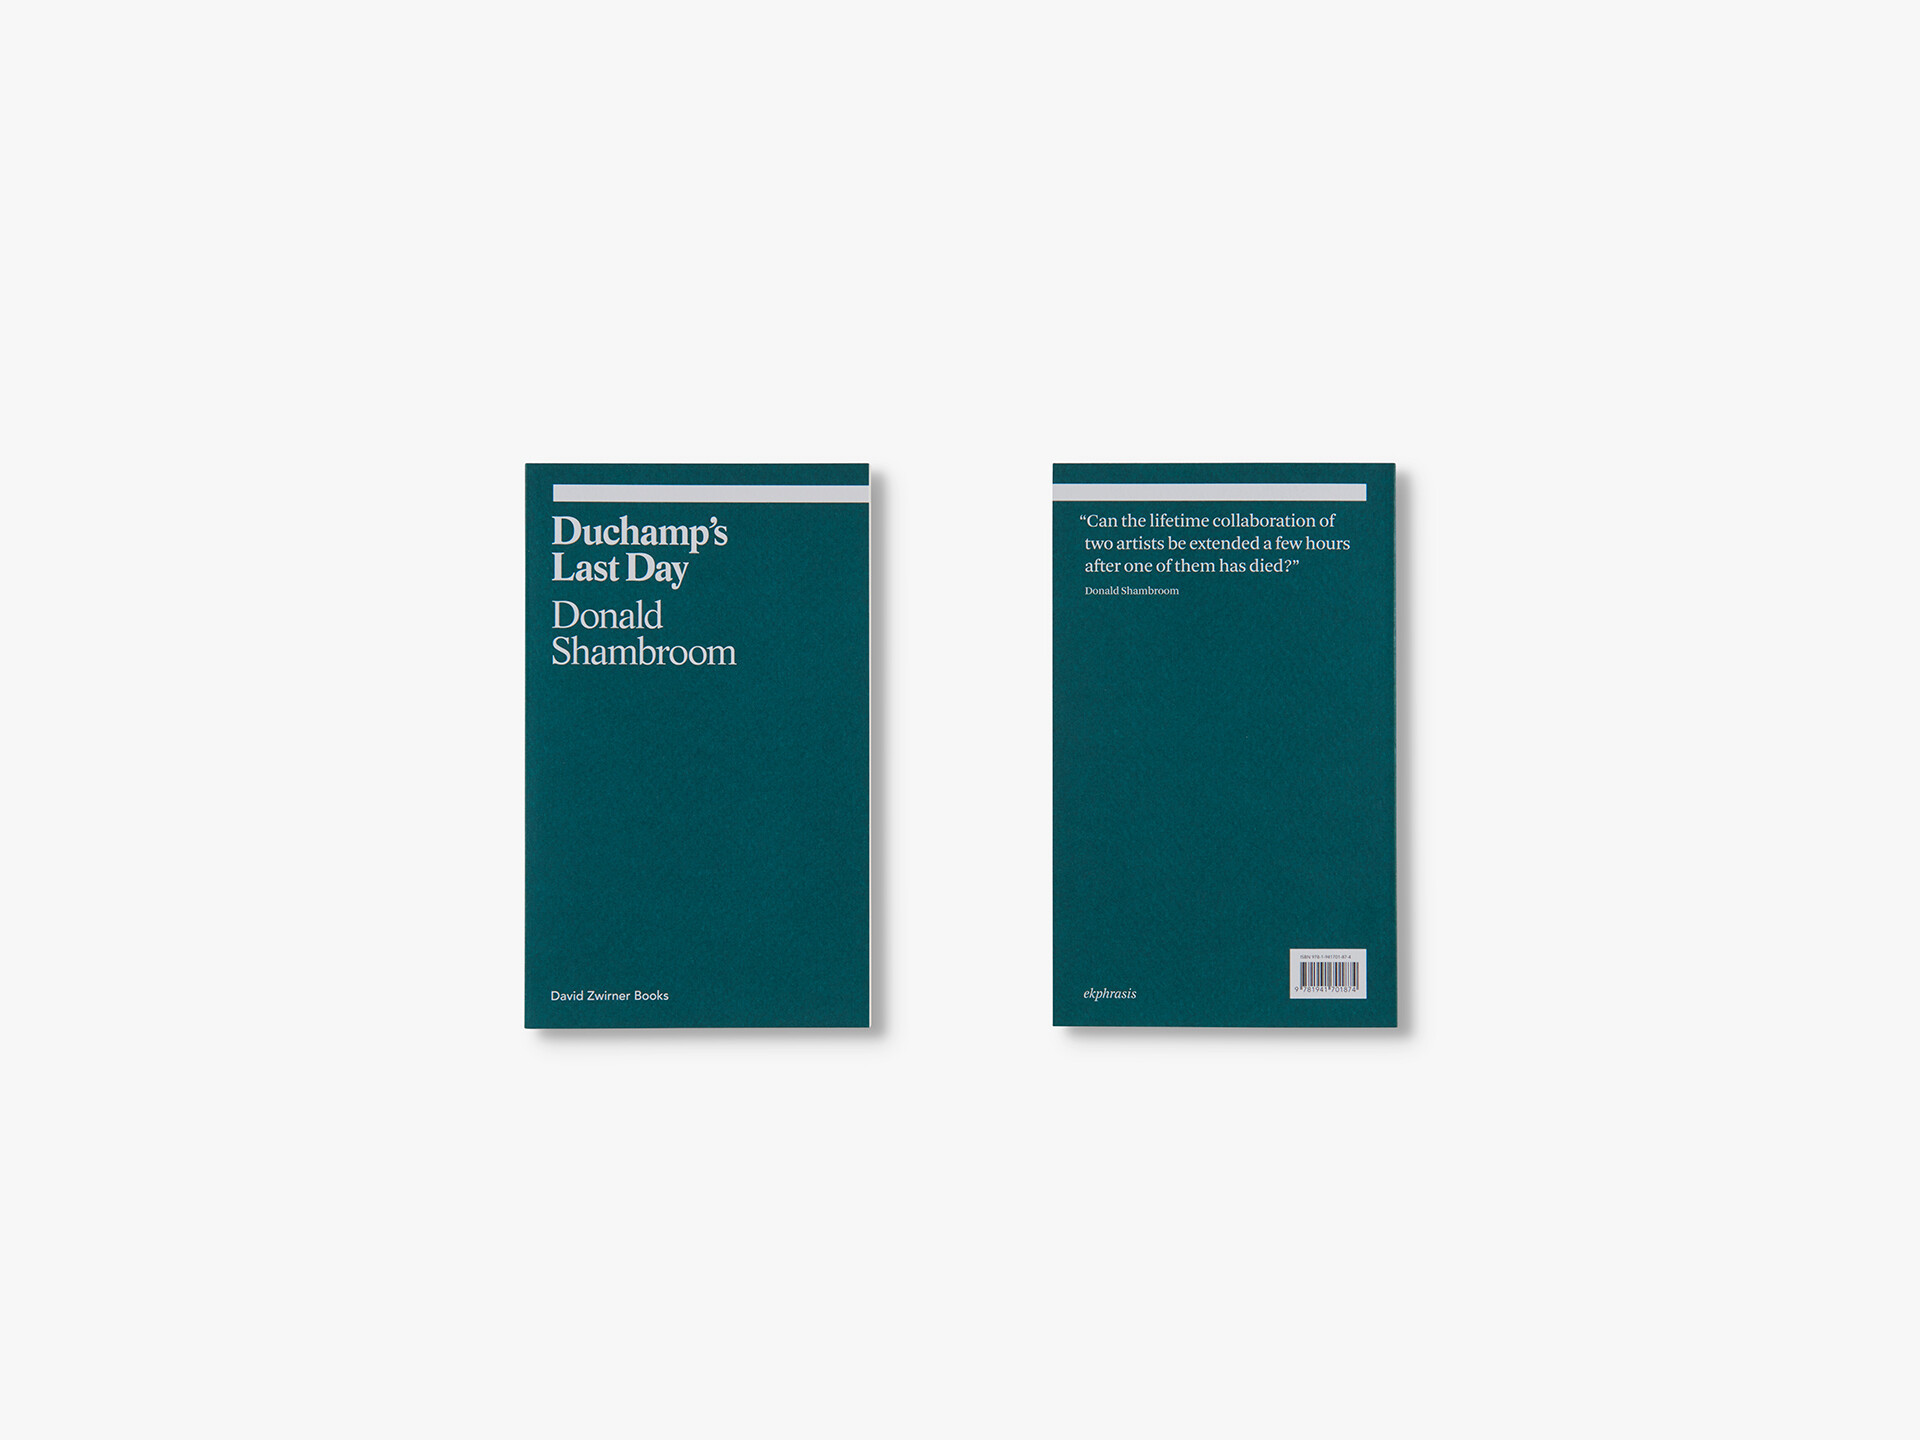 Covers of the book Duchamp's Last Day, published in 2018.